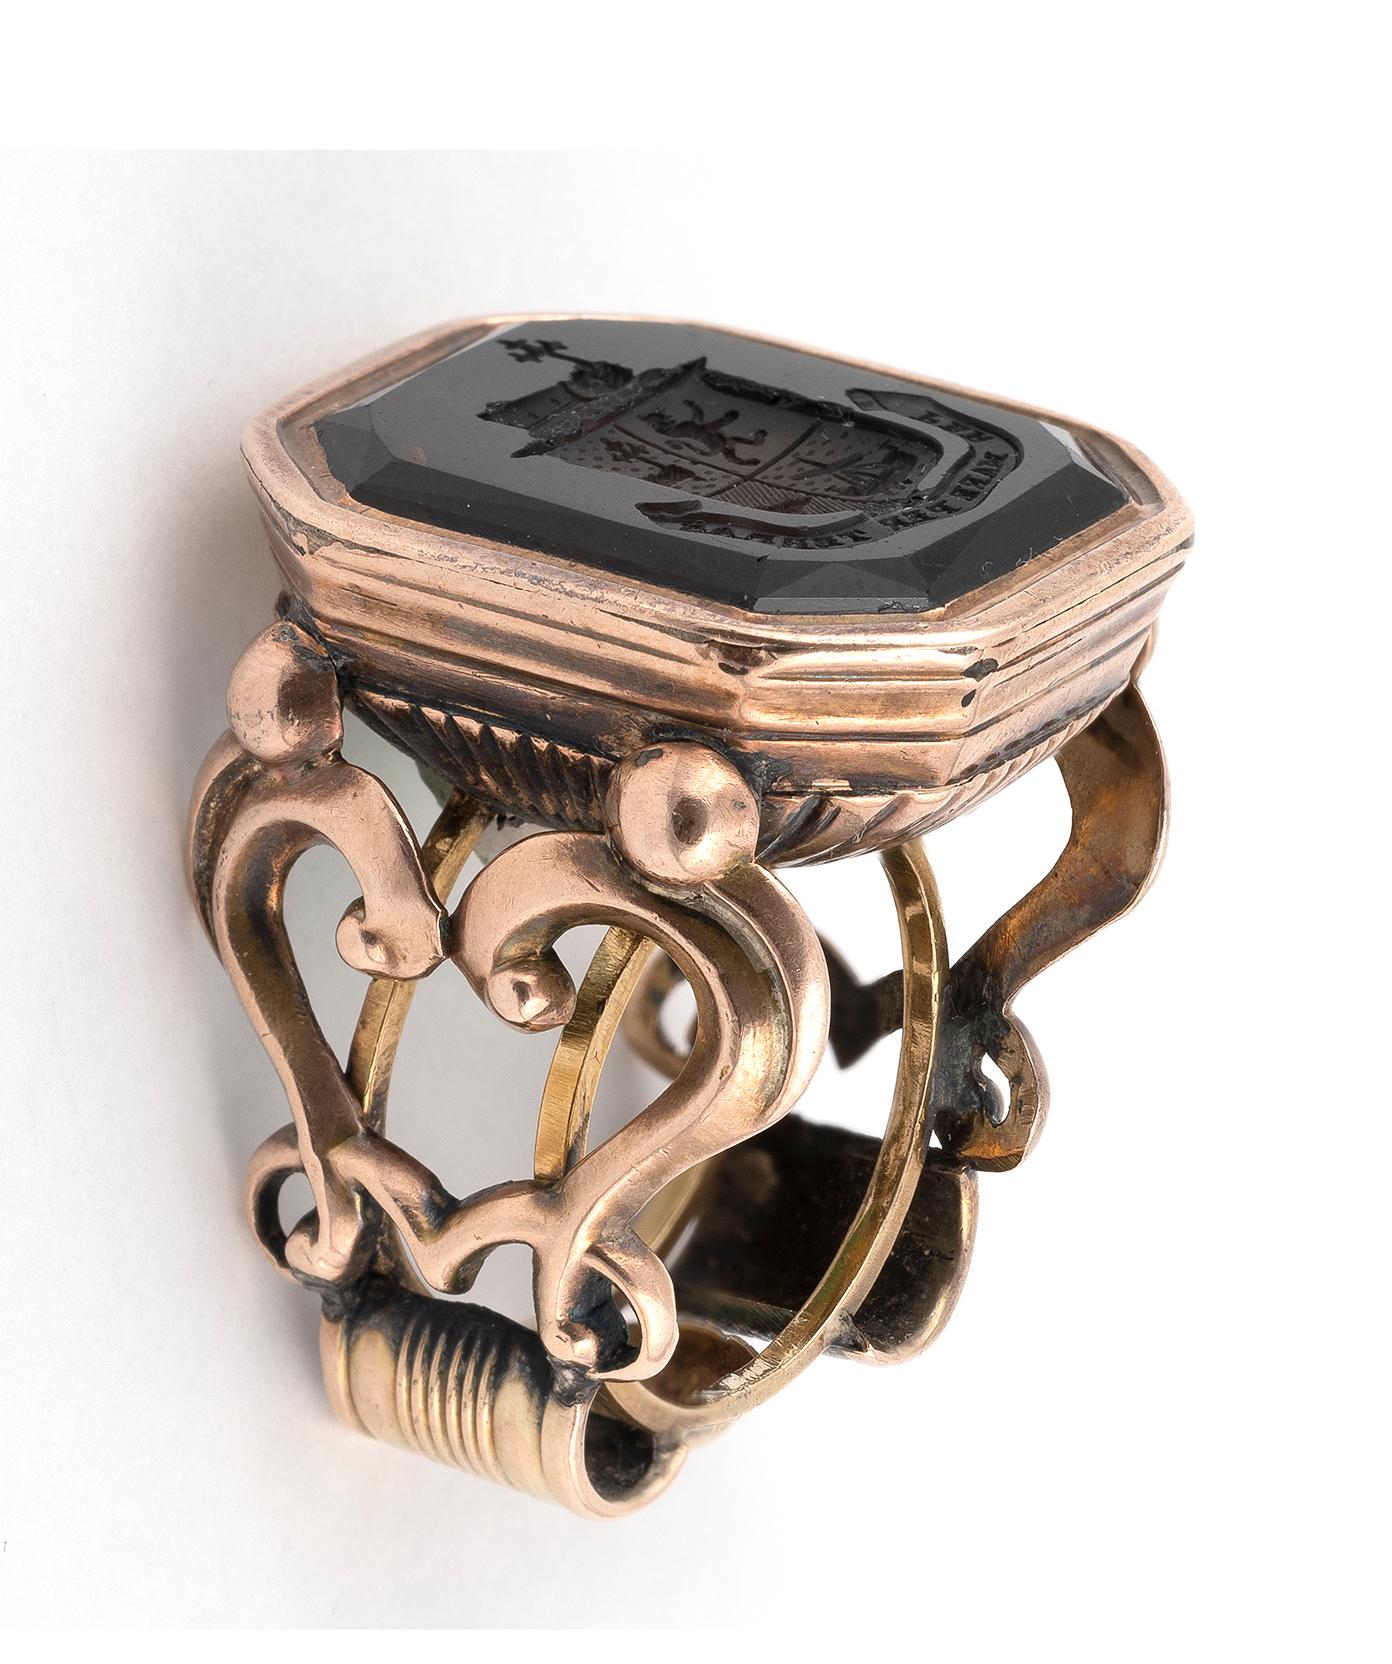 BERNARDO ANTICHITÀ PONTE VECCHIO FLORENCE
A large rectangular smokey quartz with intaglio engraved crest and motto MacDonald Family Crest - Motto: per mare per terras (by sea and land) setting in rose gold

Size : 7

Weight : 24.7 gr